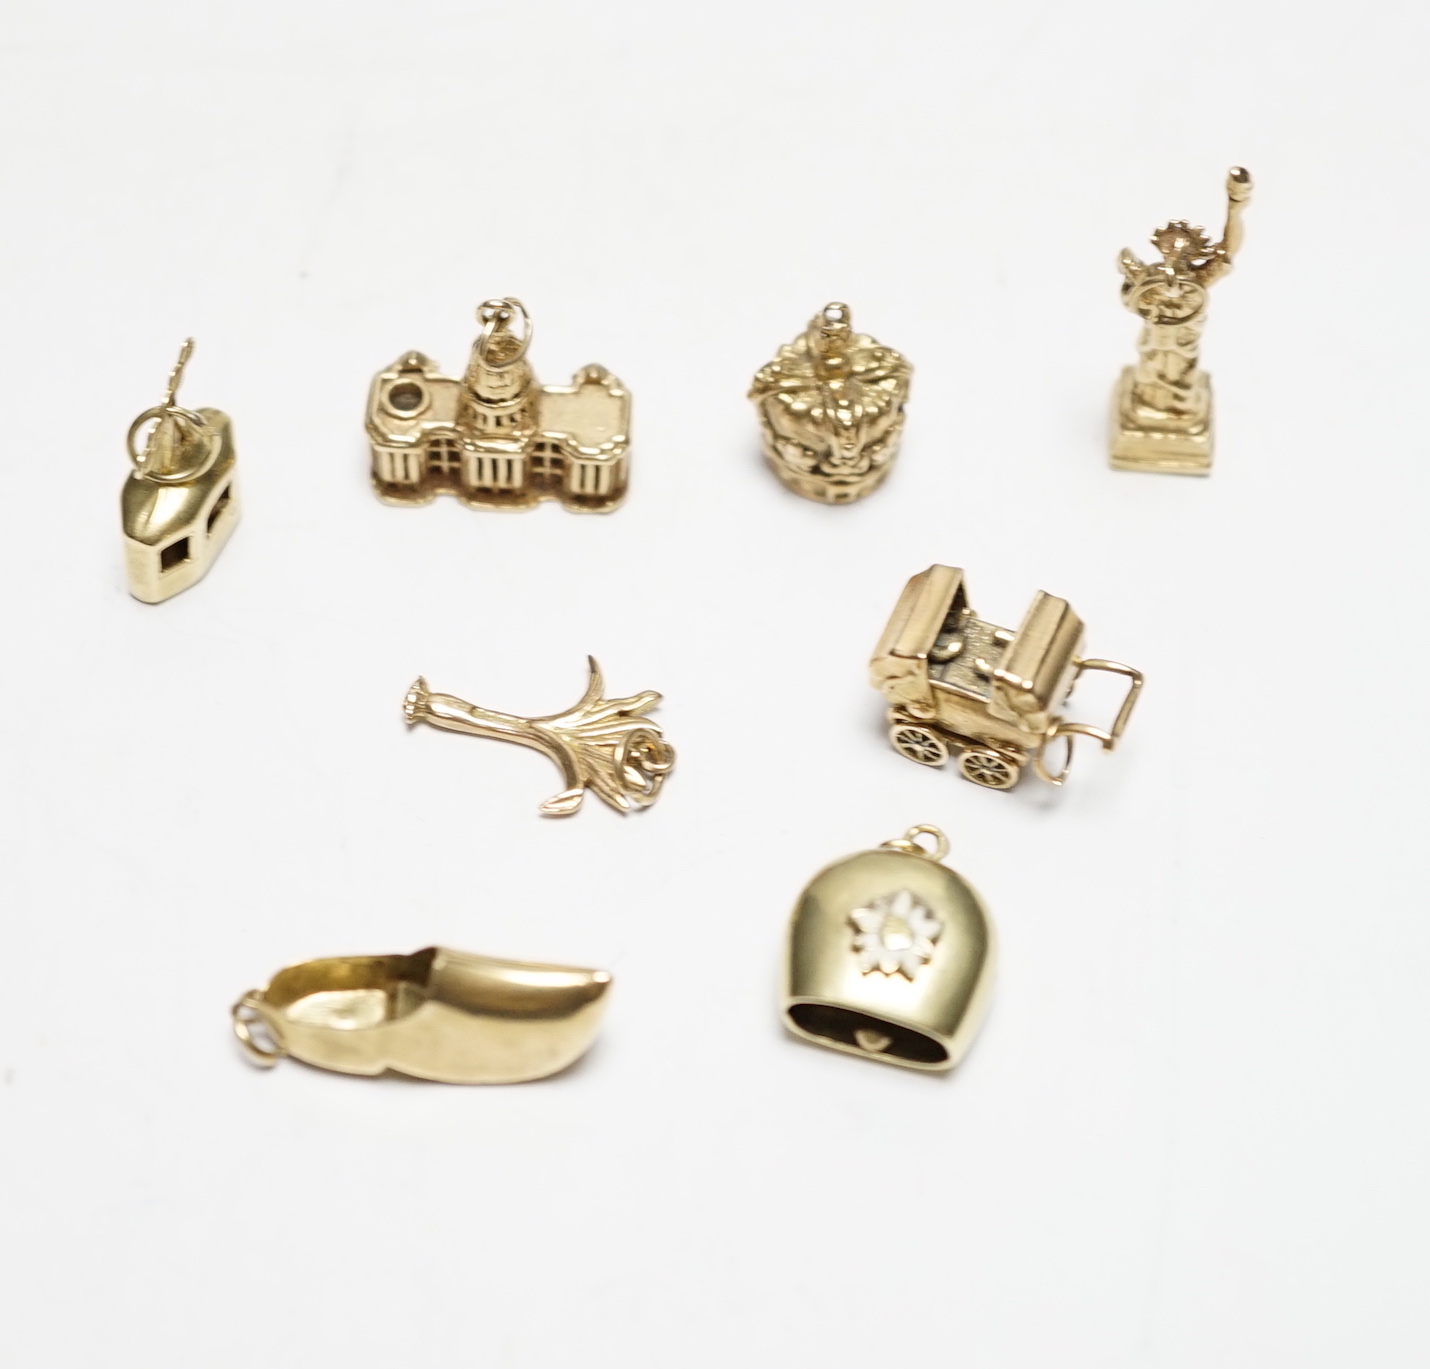 A 585 'Cable car' charm, 1.4 grams, three 9ct gold charms, 9.9 grams and four other yellow metal charms, one with enamel, gross weight 12.5 grams.